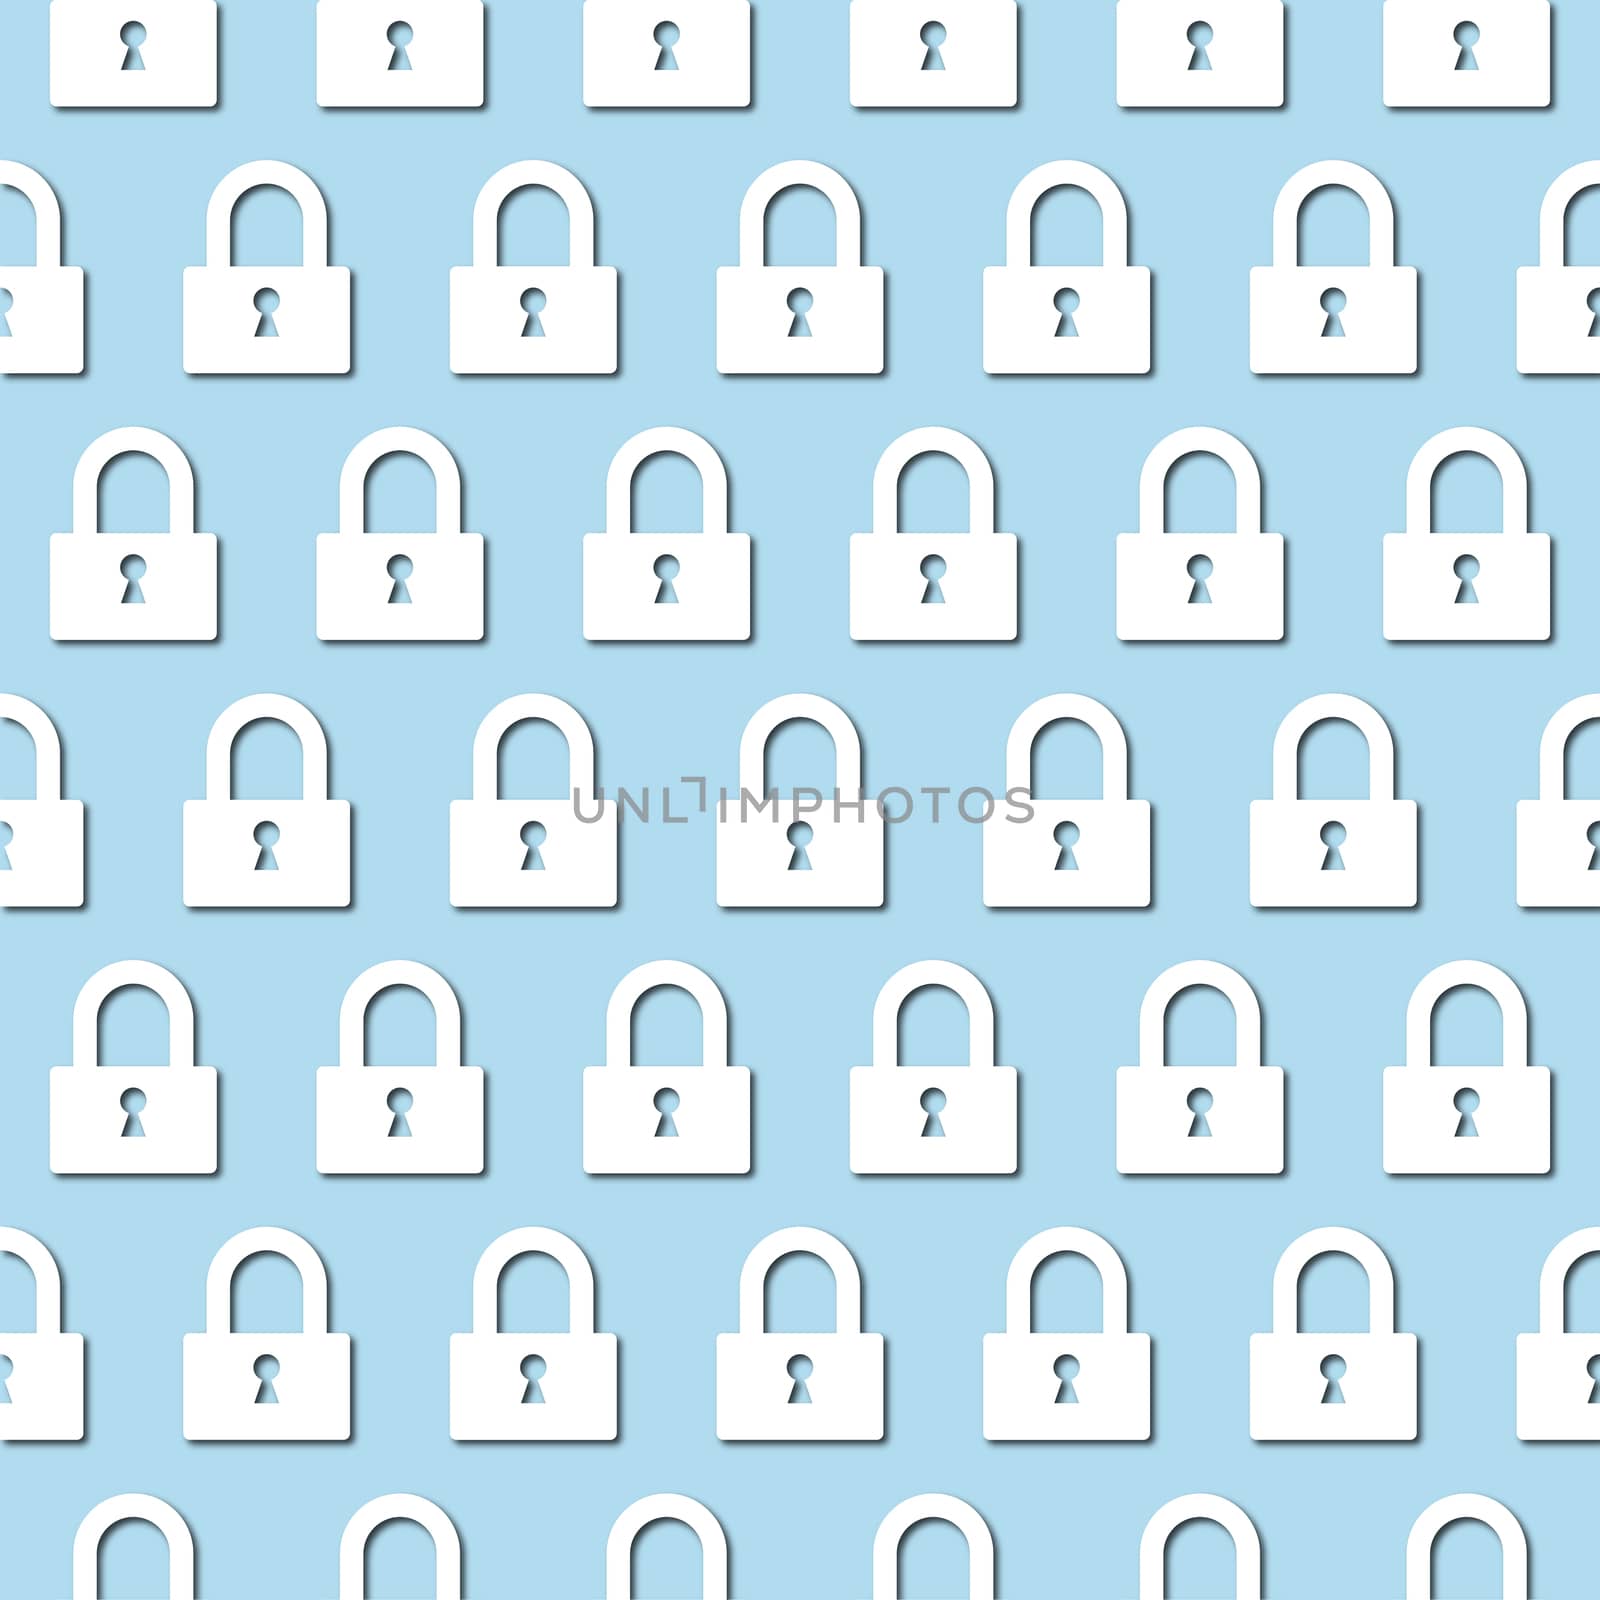 White lock icon on pale blue background, seamless pattern. Paper cut style with drop shadows and highlights.